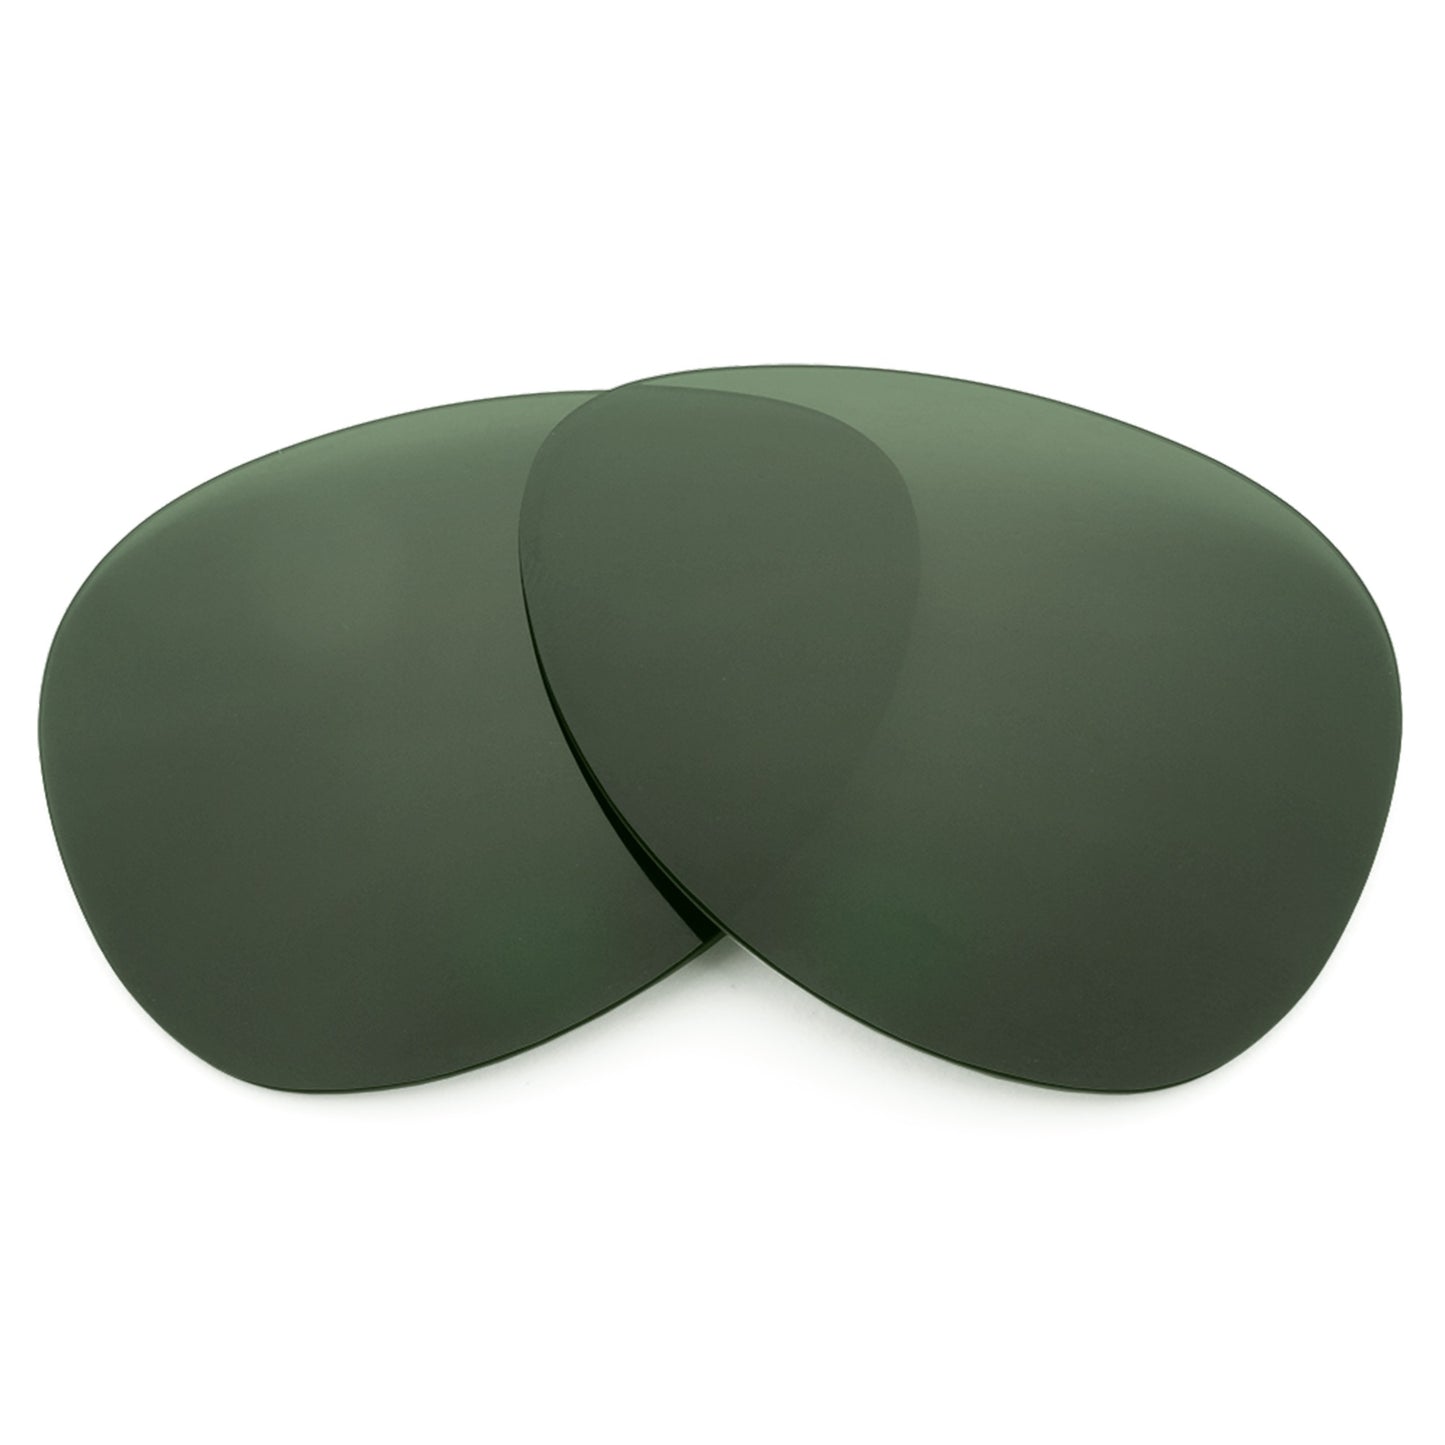 Revant replacement lenses for Ray-Ban Gatsby II RB4257 50mm Elite Polarized Gray Green